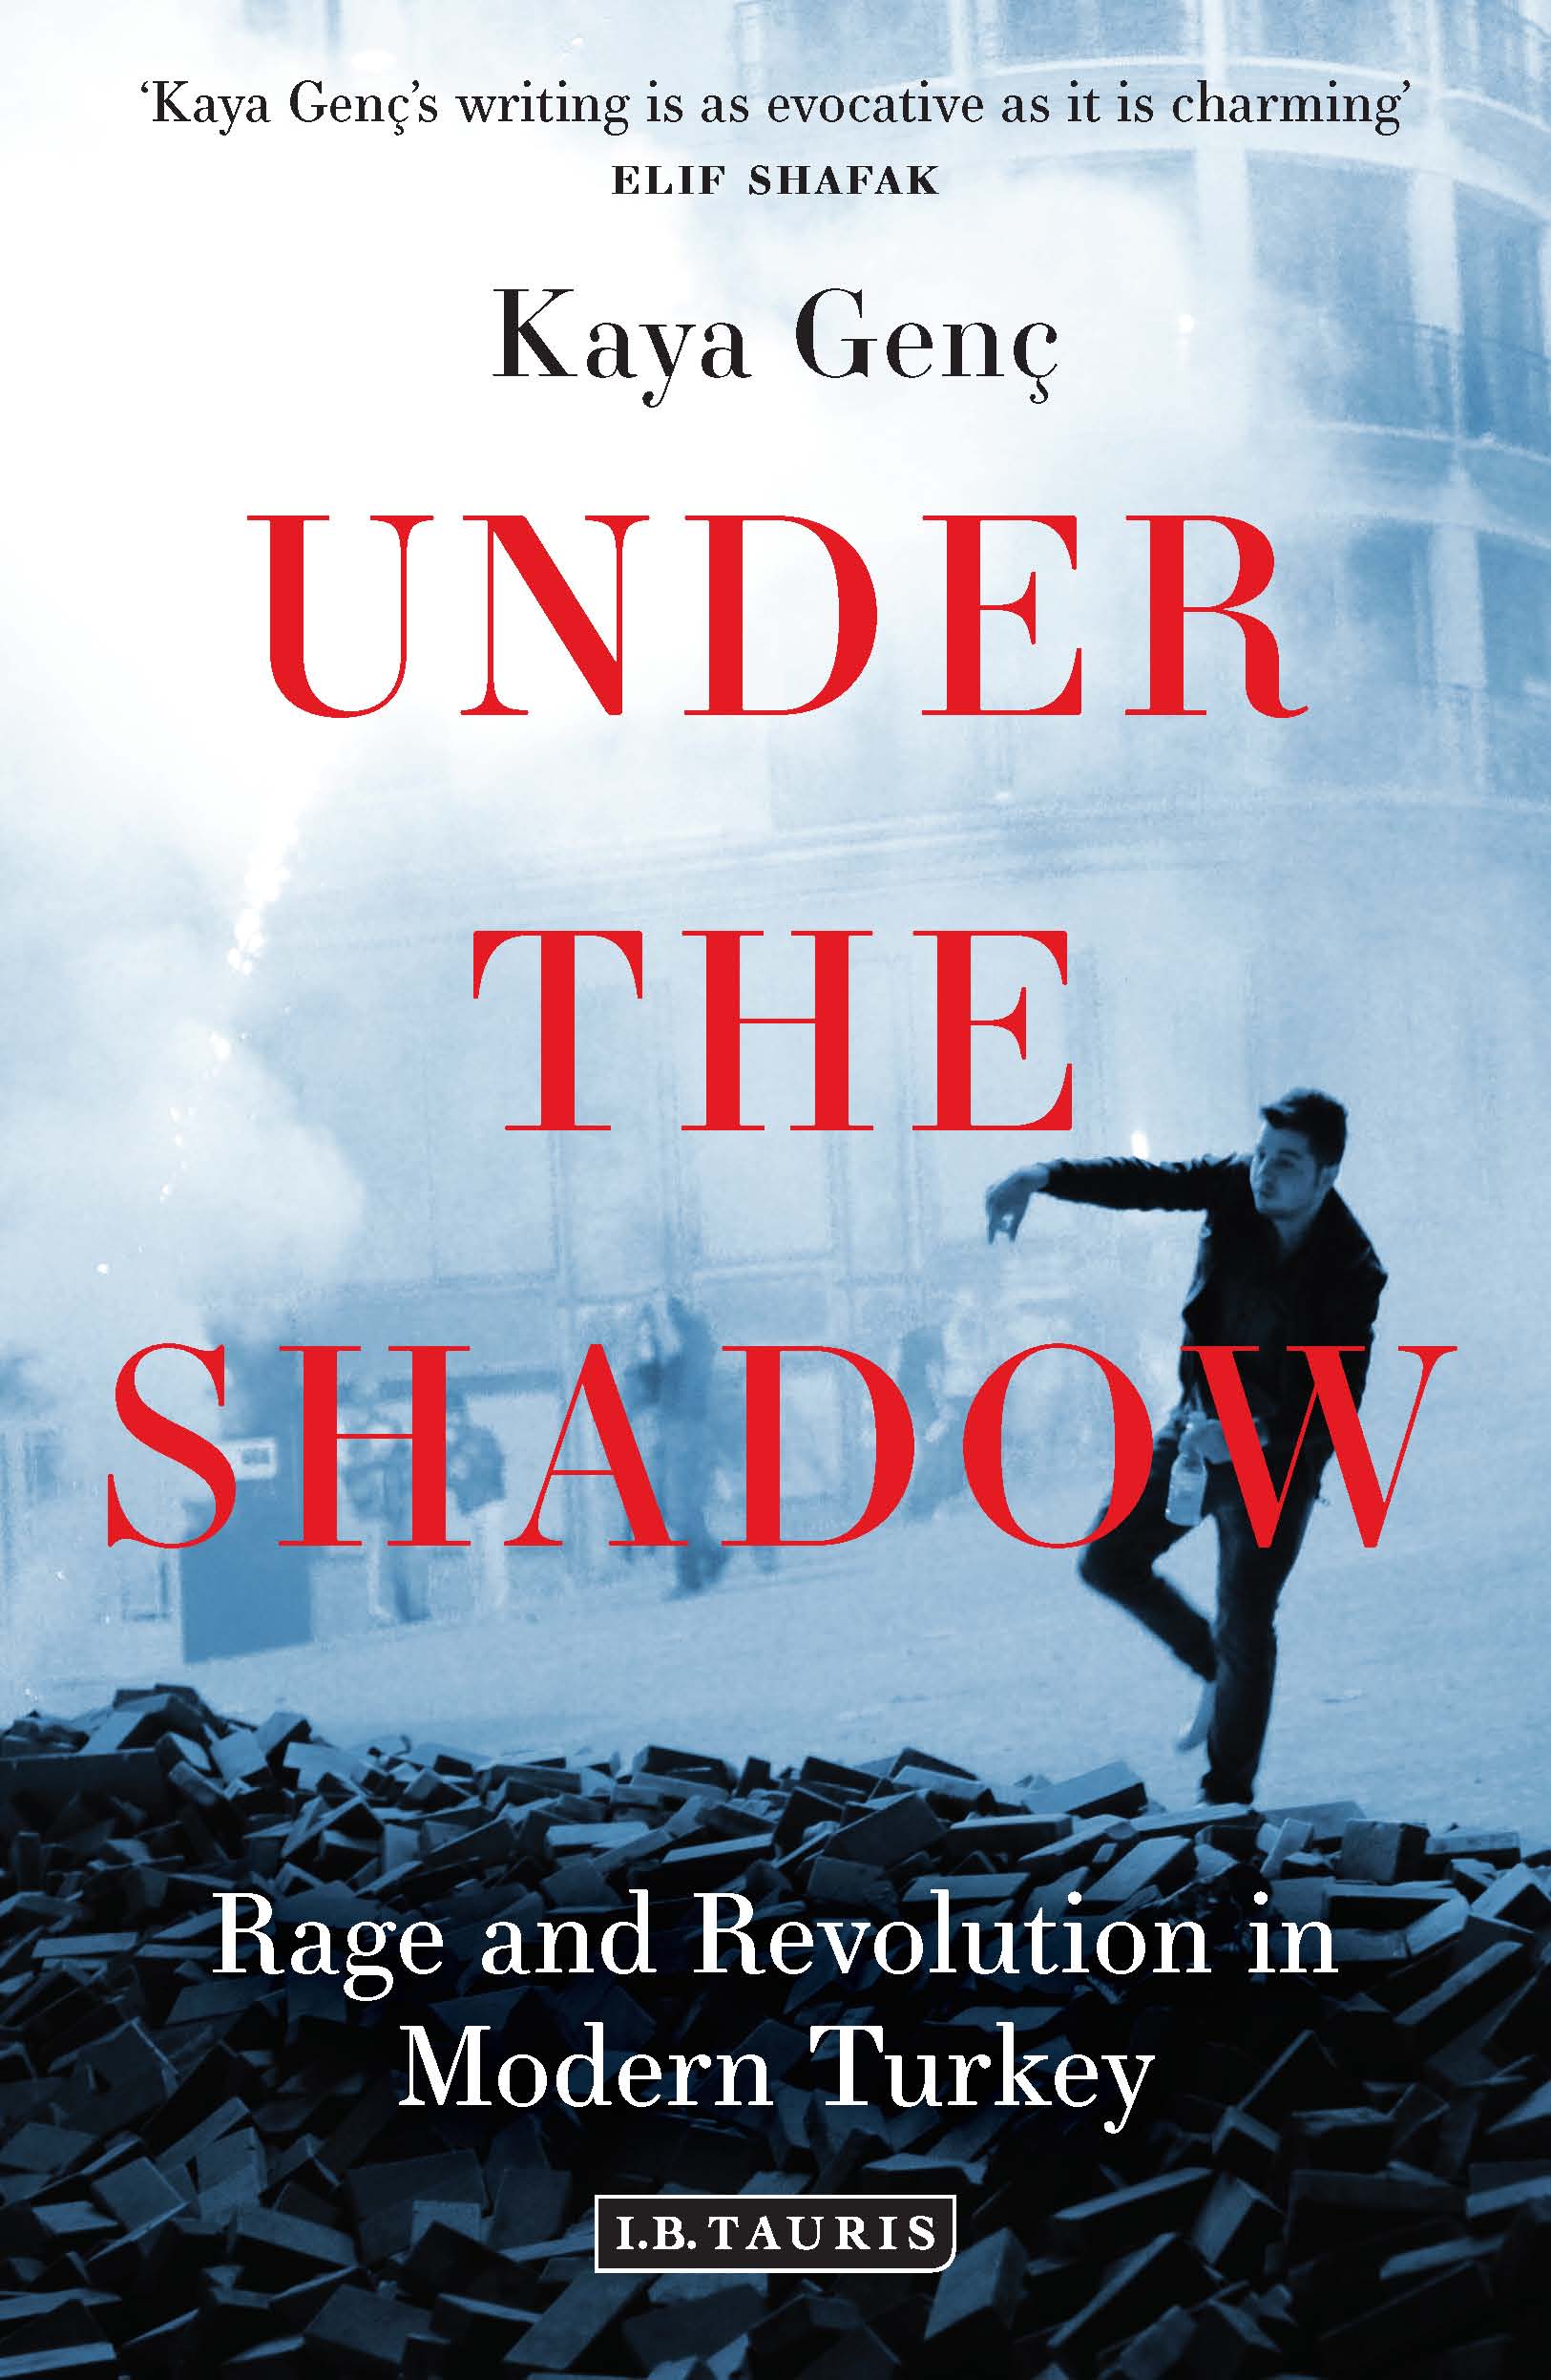 Book Launch: Under the Shadow by Kaya Genç with Molly Crabapple